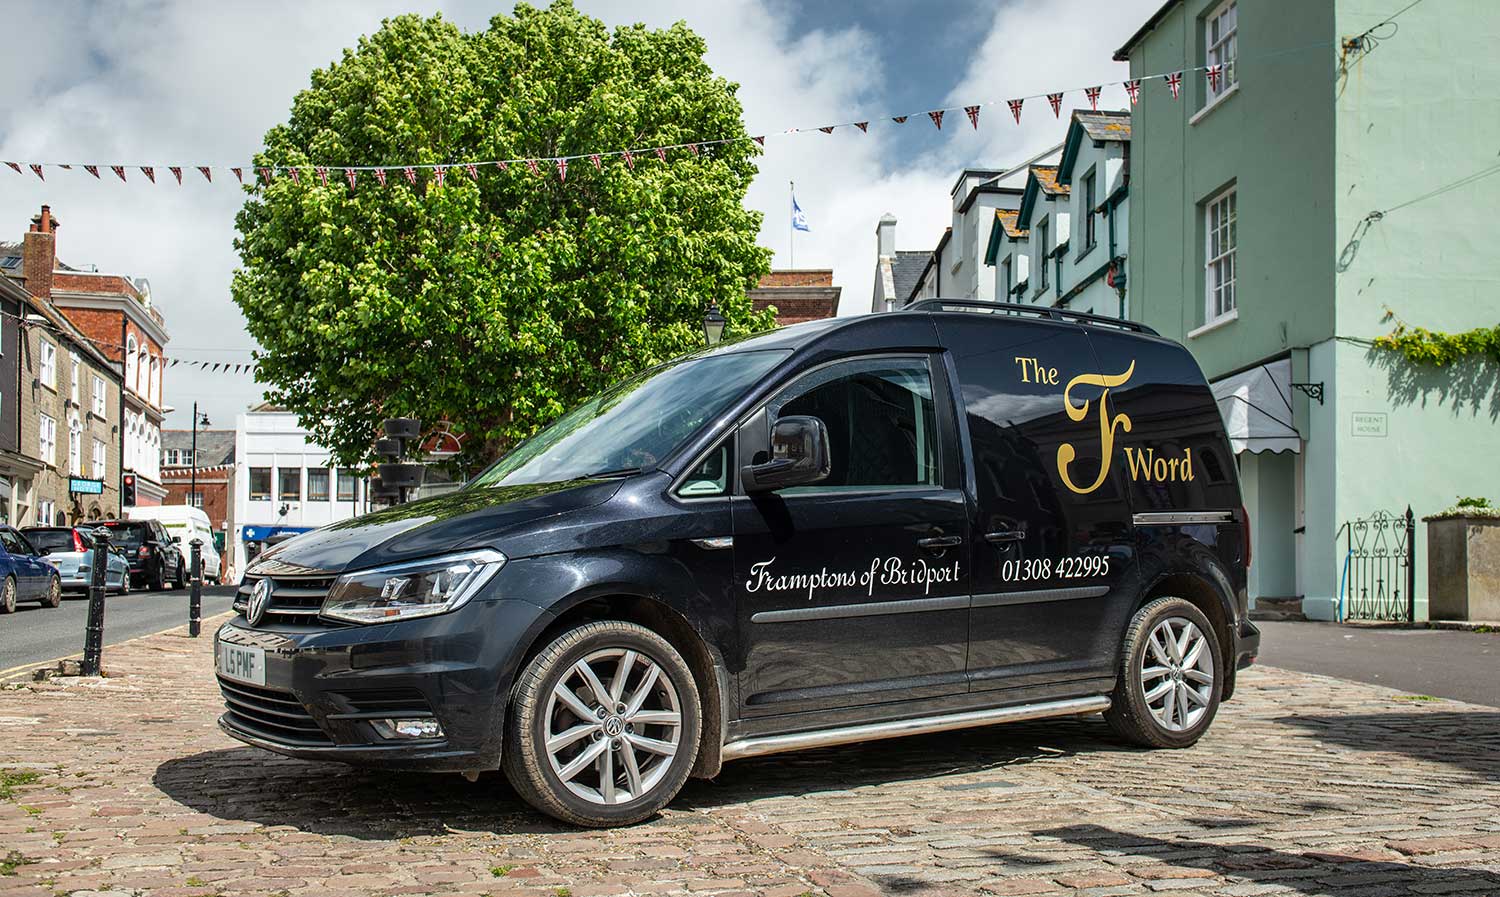 Framptons of Bridport home delivery service